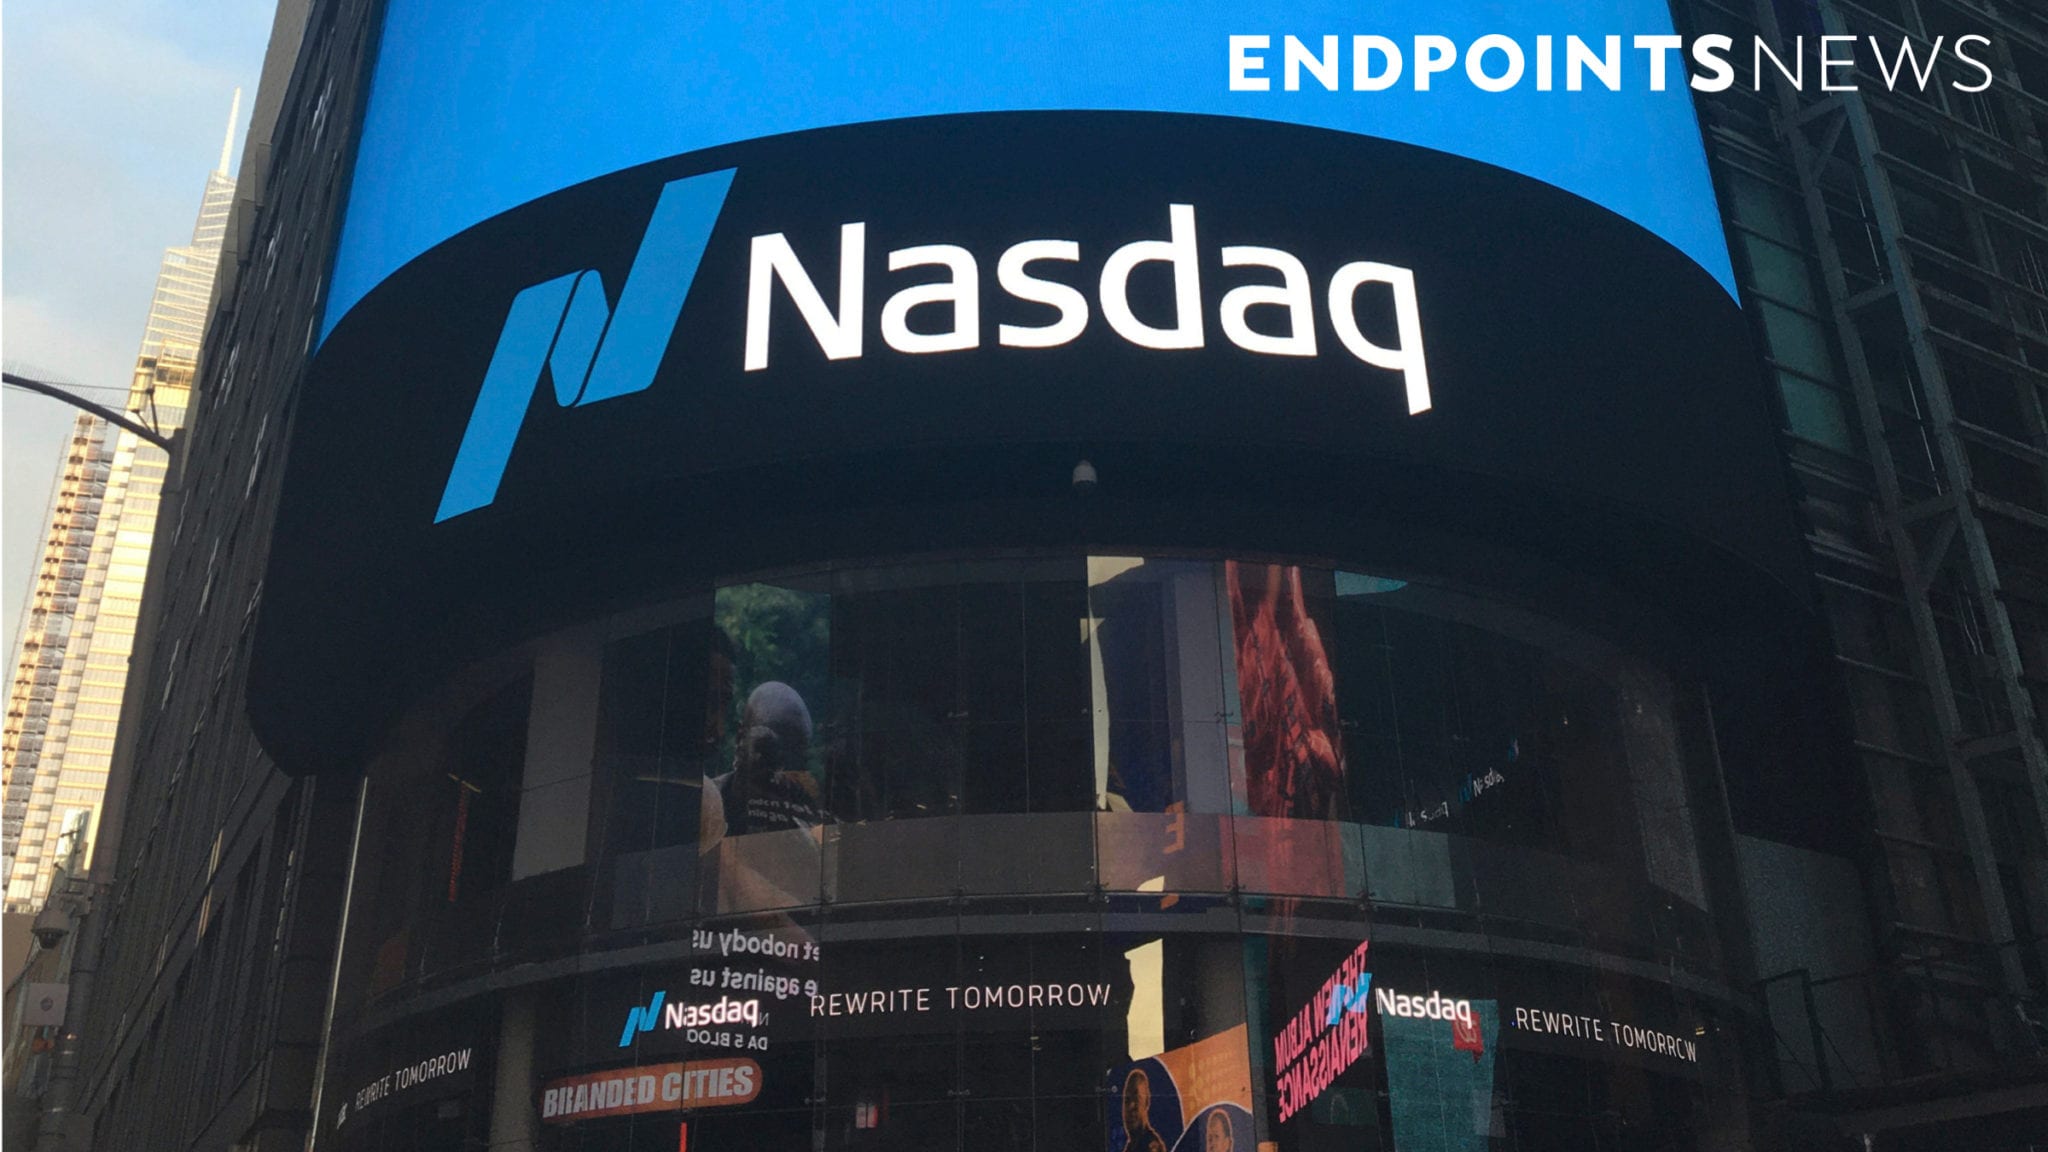 Biotech's IPO raise approaches $5.5B as Nasdaq continues to prove fruitful with 2 debuts and three new filings